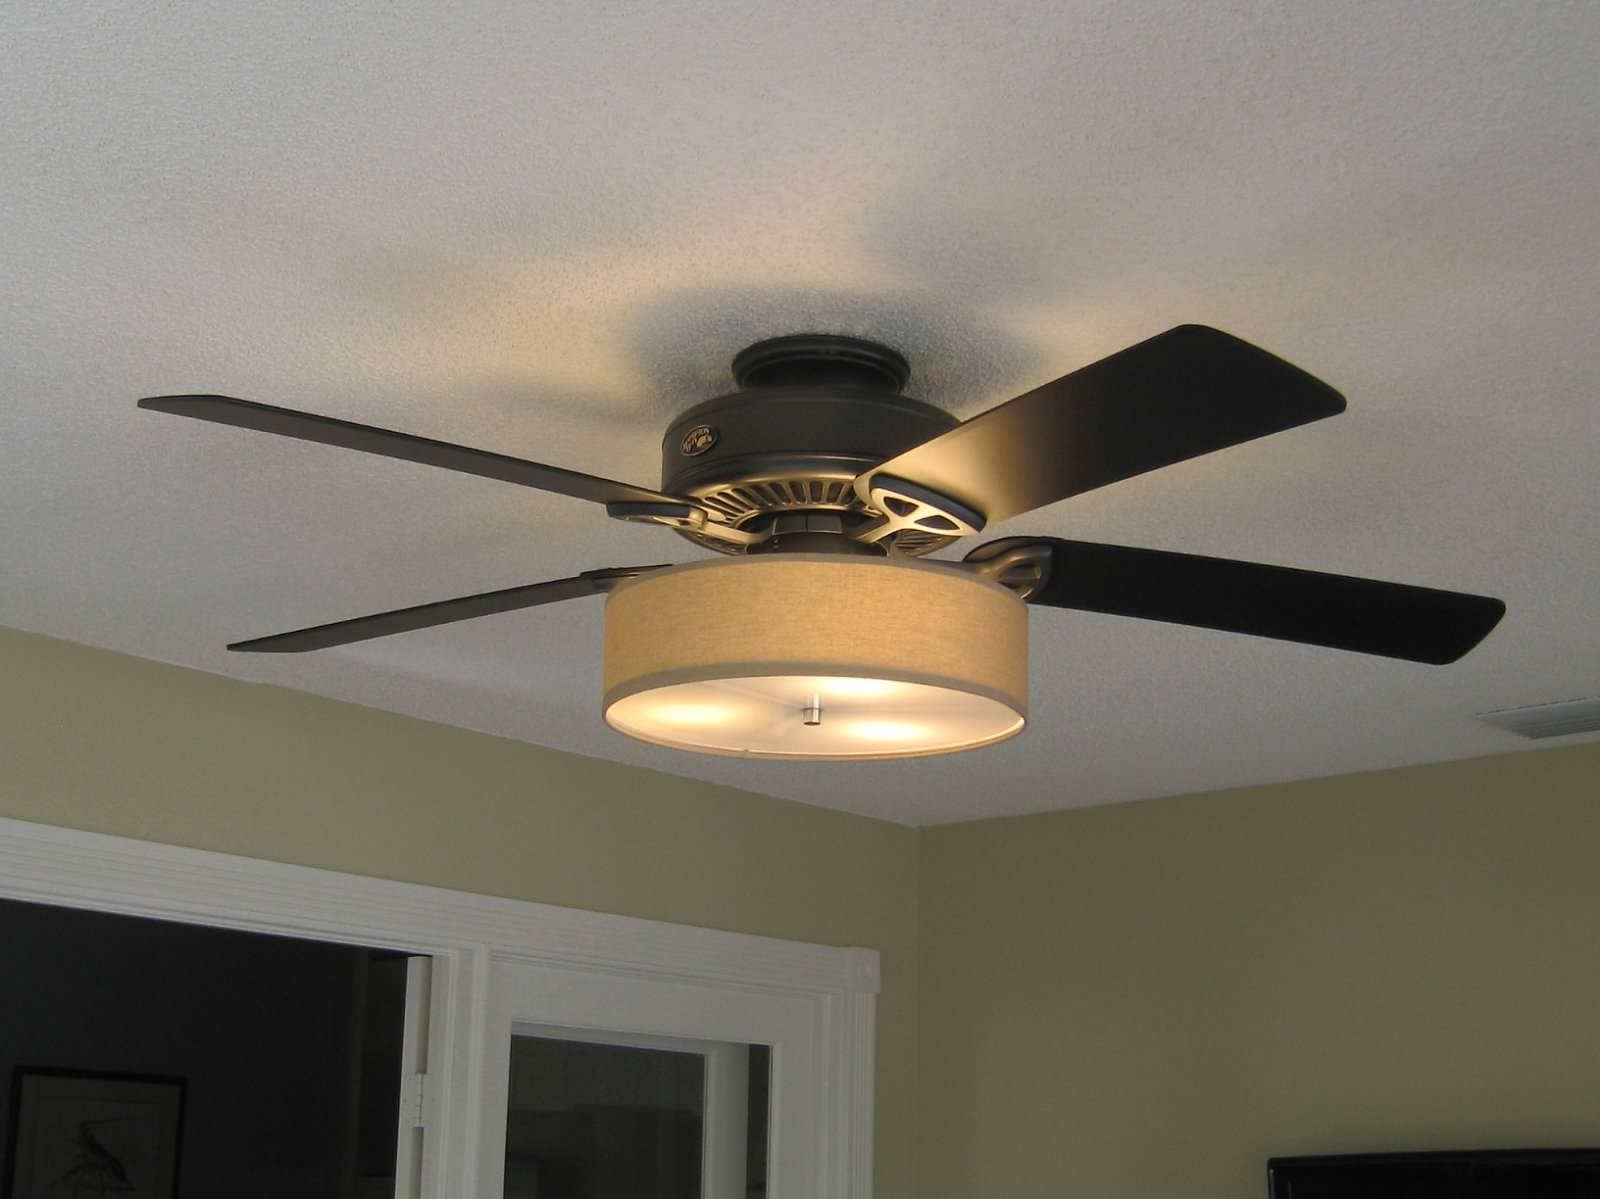 Permalink to Ceiling Fan Drum Shade Light Kit